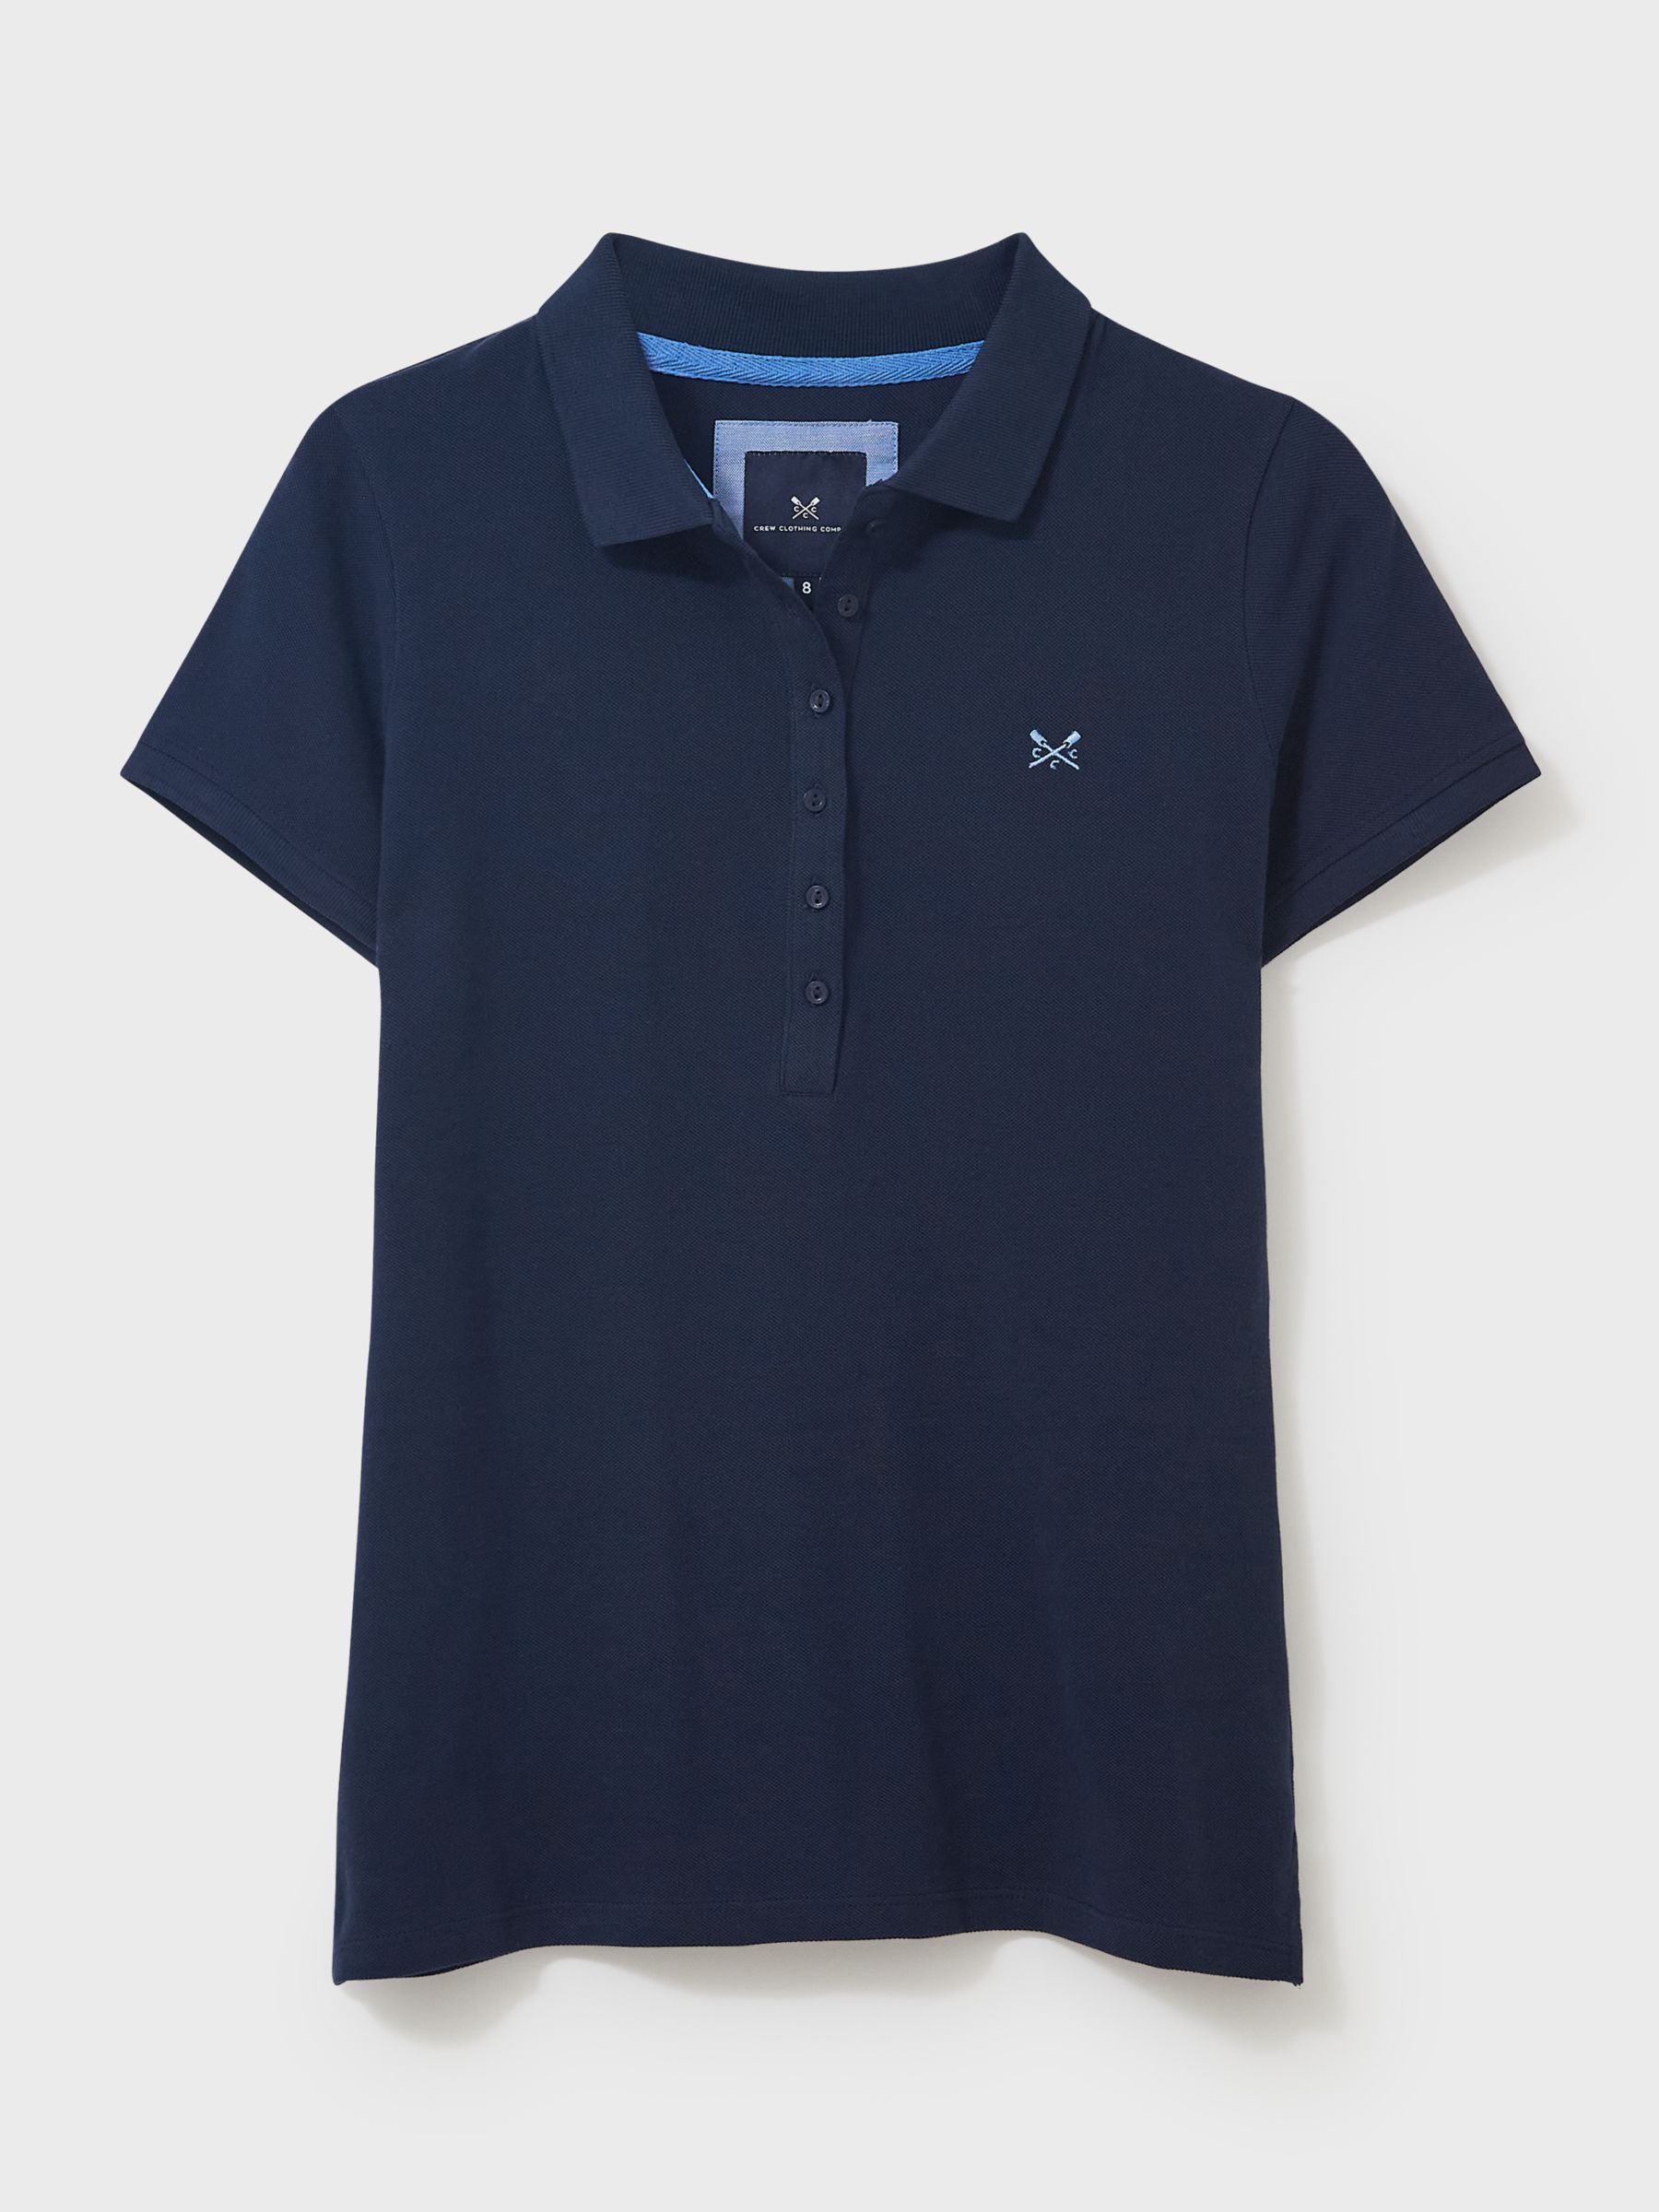 Crew Clothing Organic Cotton Classic Polo Top, Navy Blue at John Lewis ...